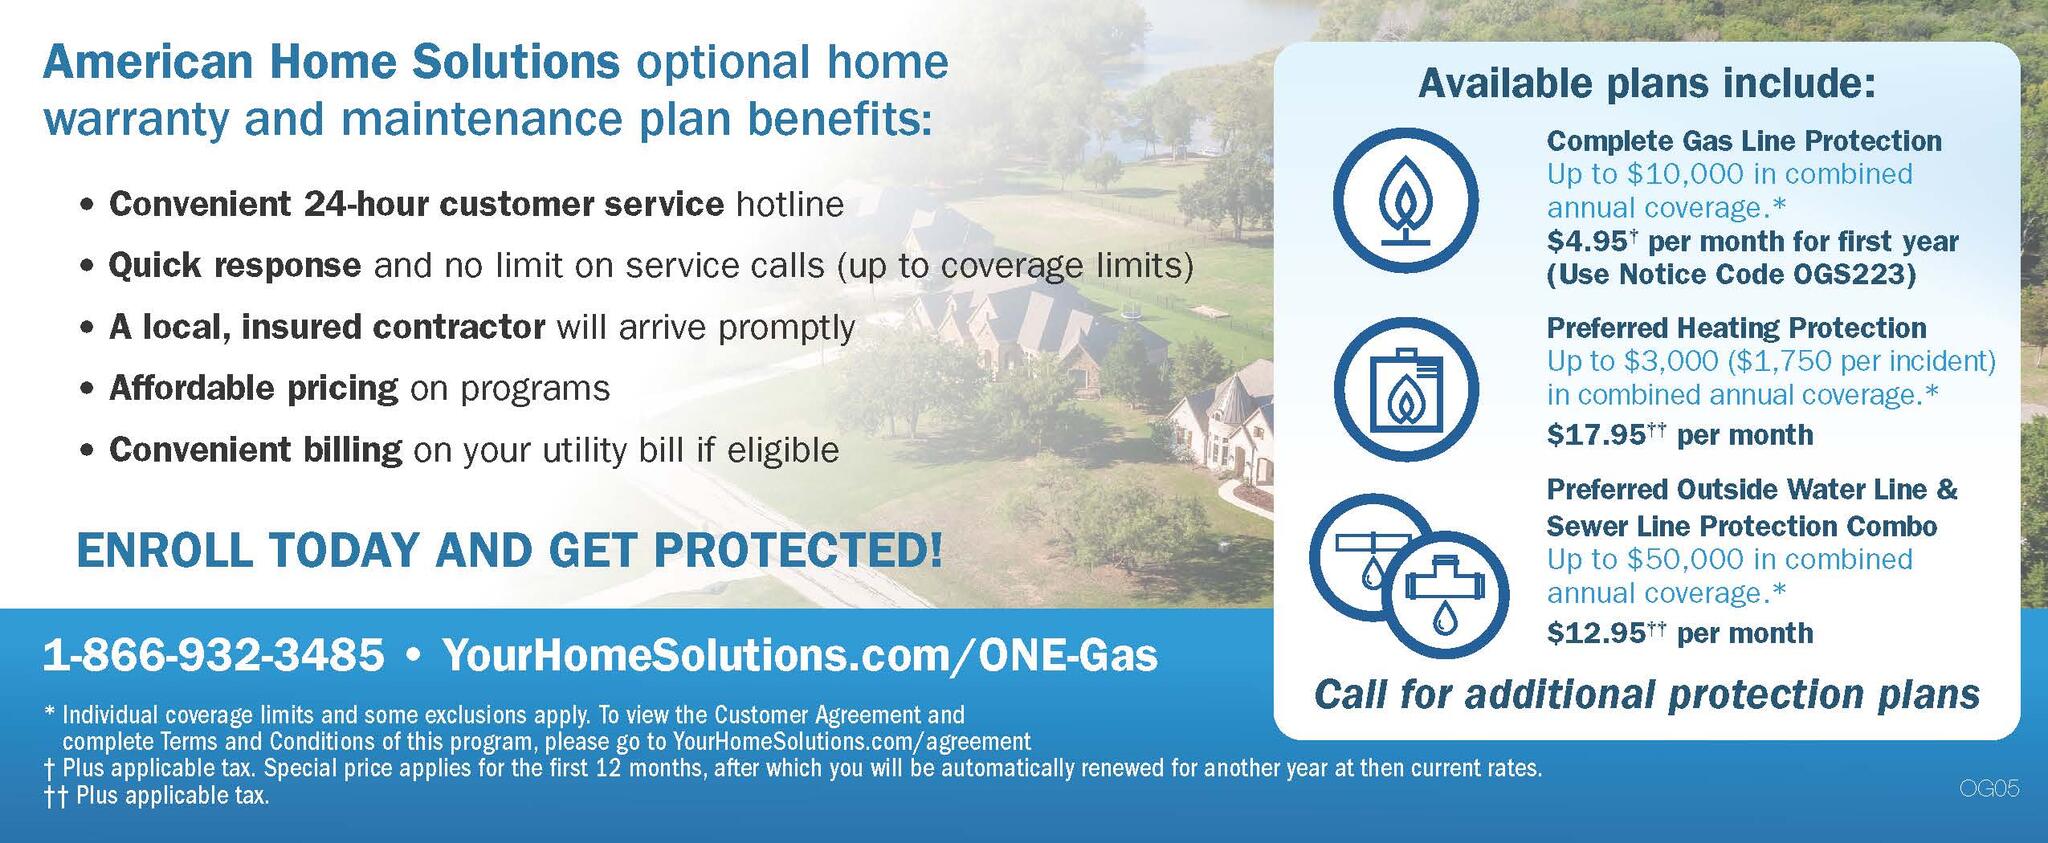 american-home-solutions-customer-protection-program-texas-gas-service